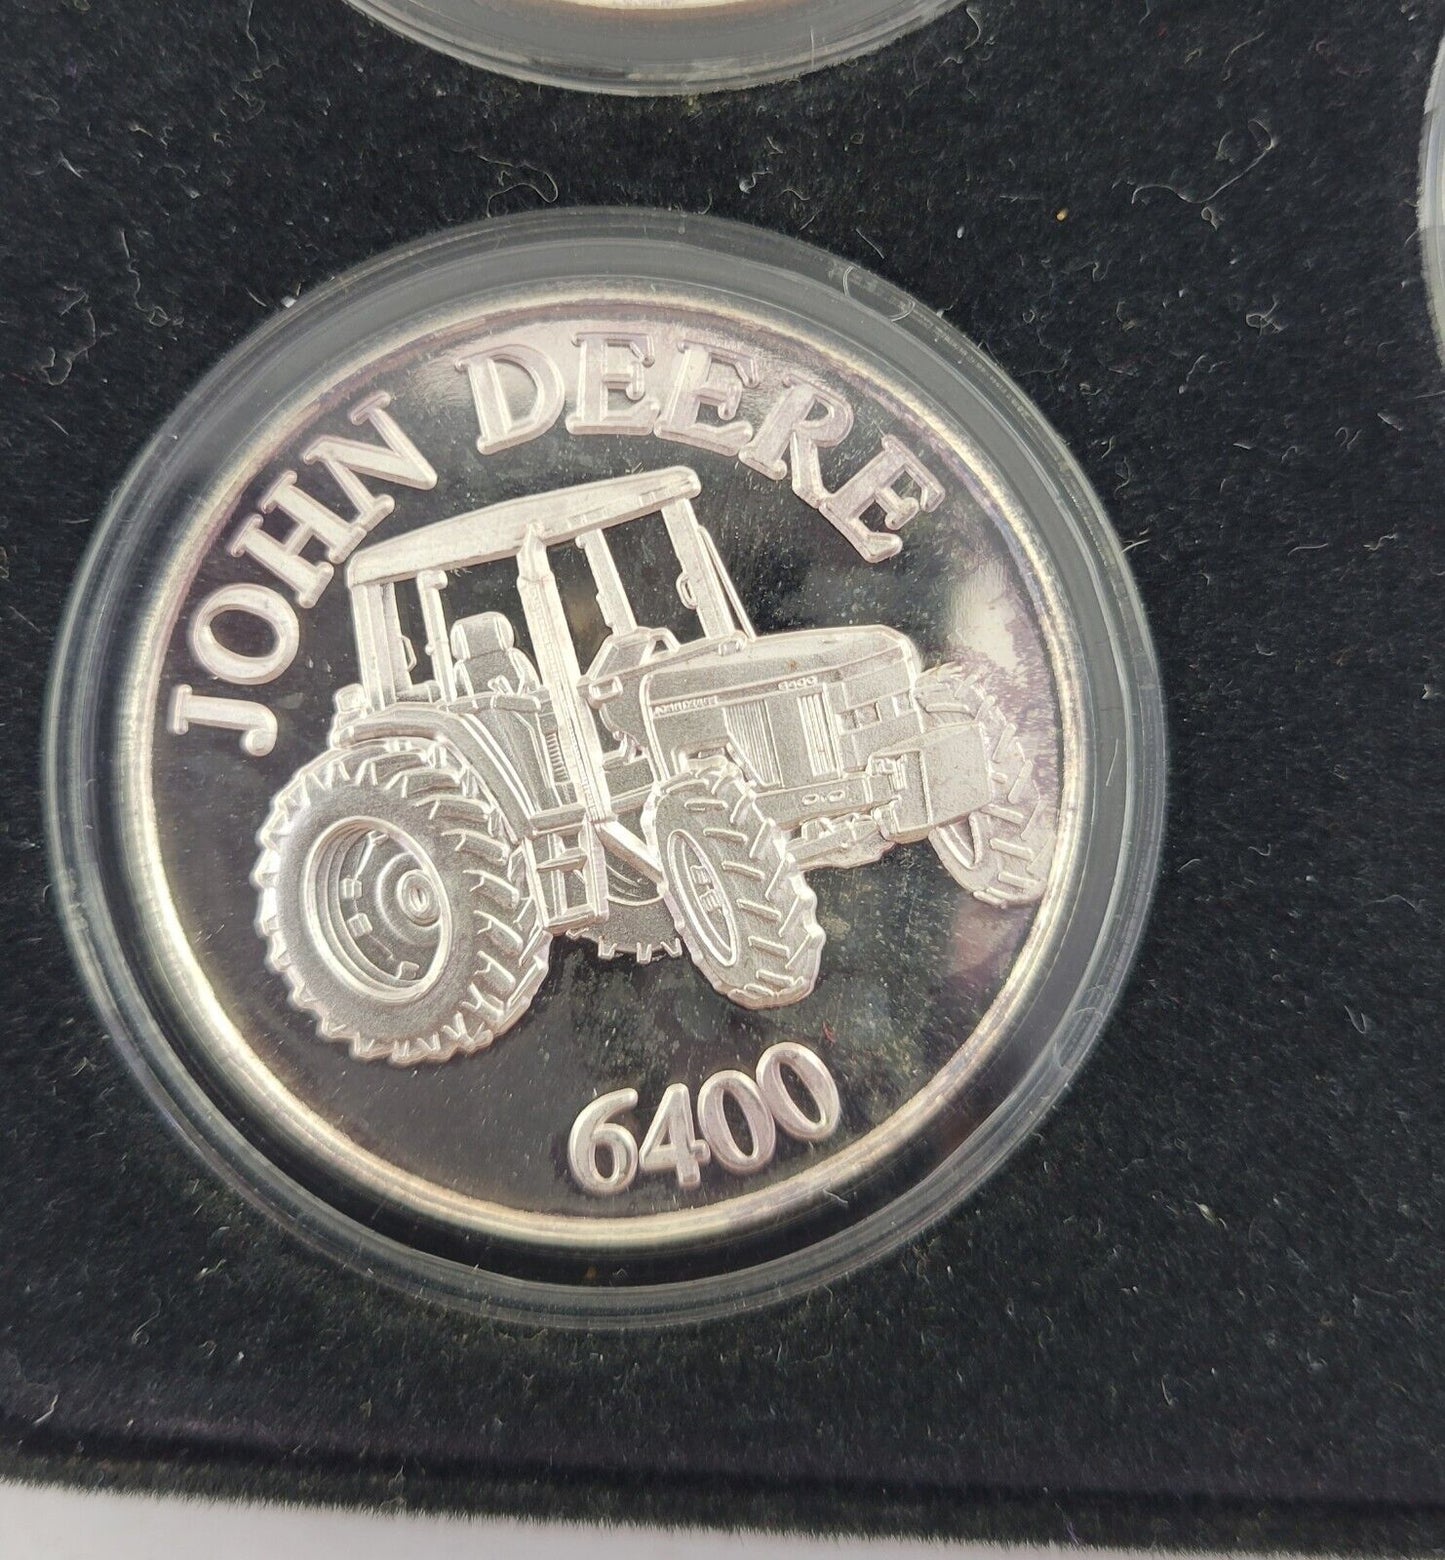 John Deere Tractor 5pc Set Of 1 oz .999 Fine Silver Rounds In Plastic & Boxed